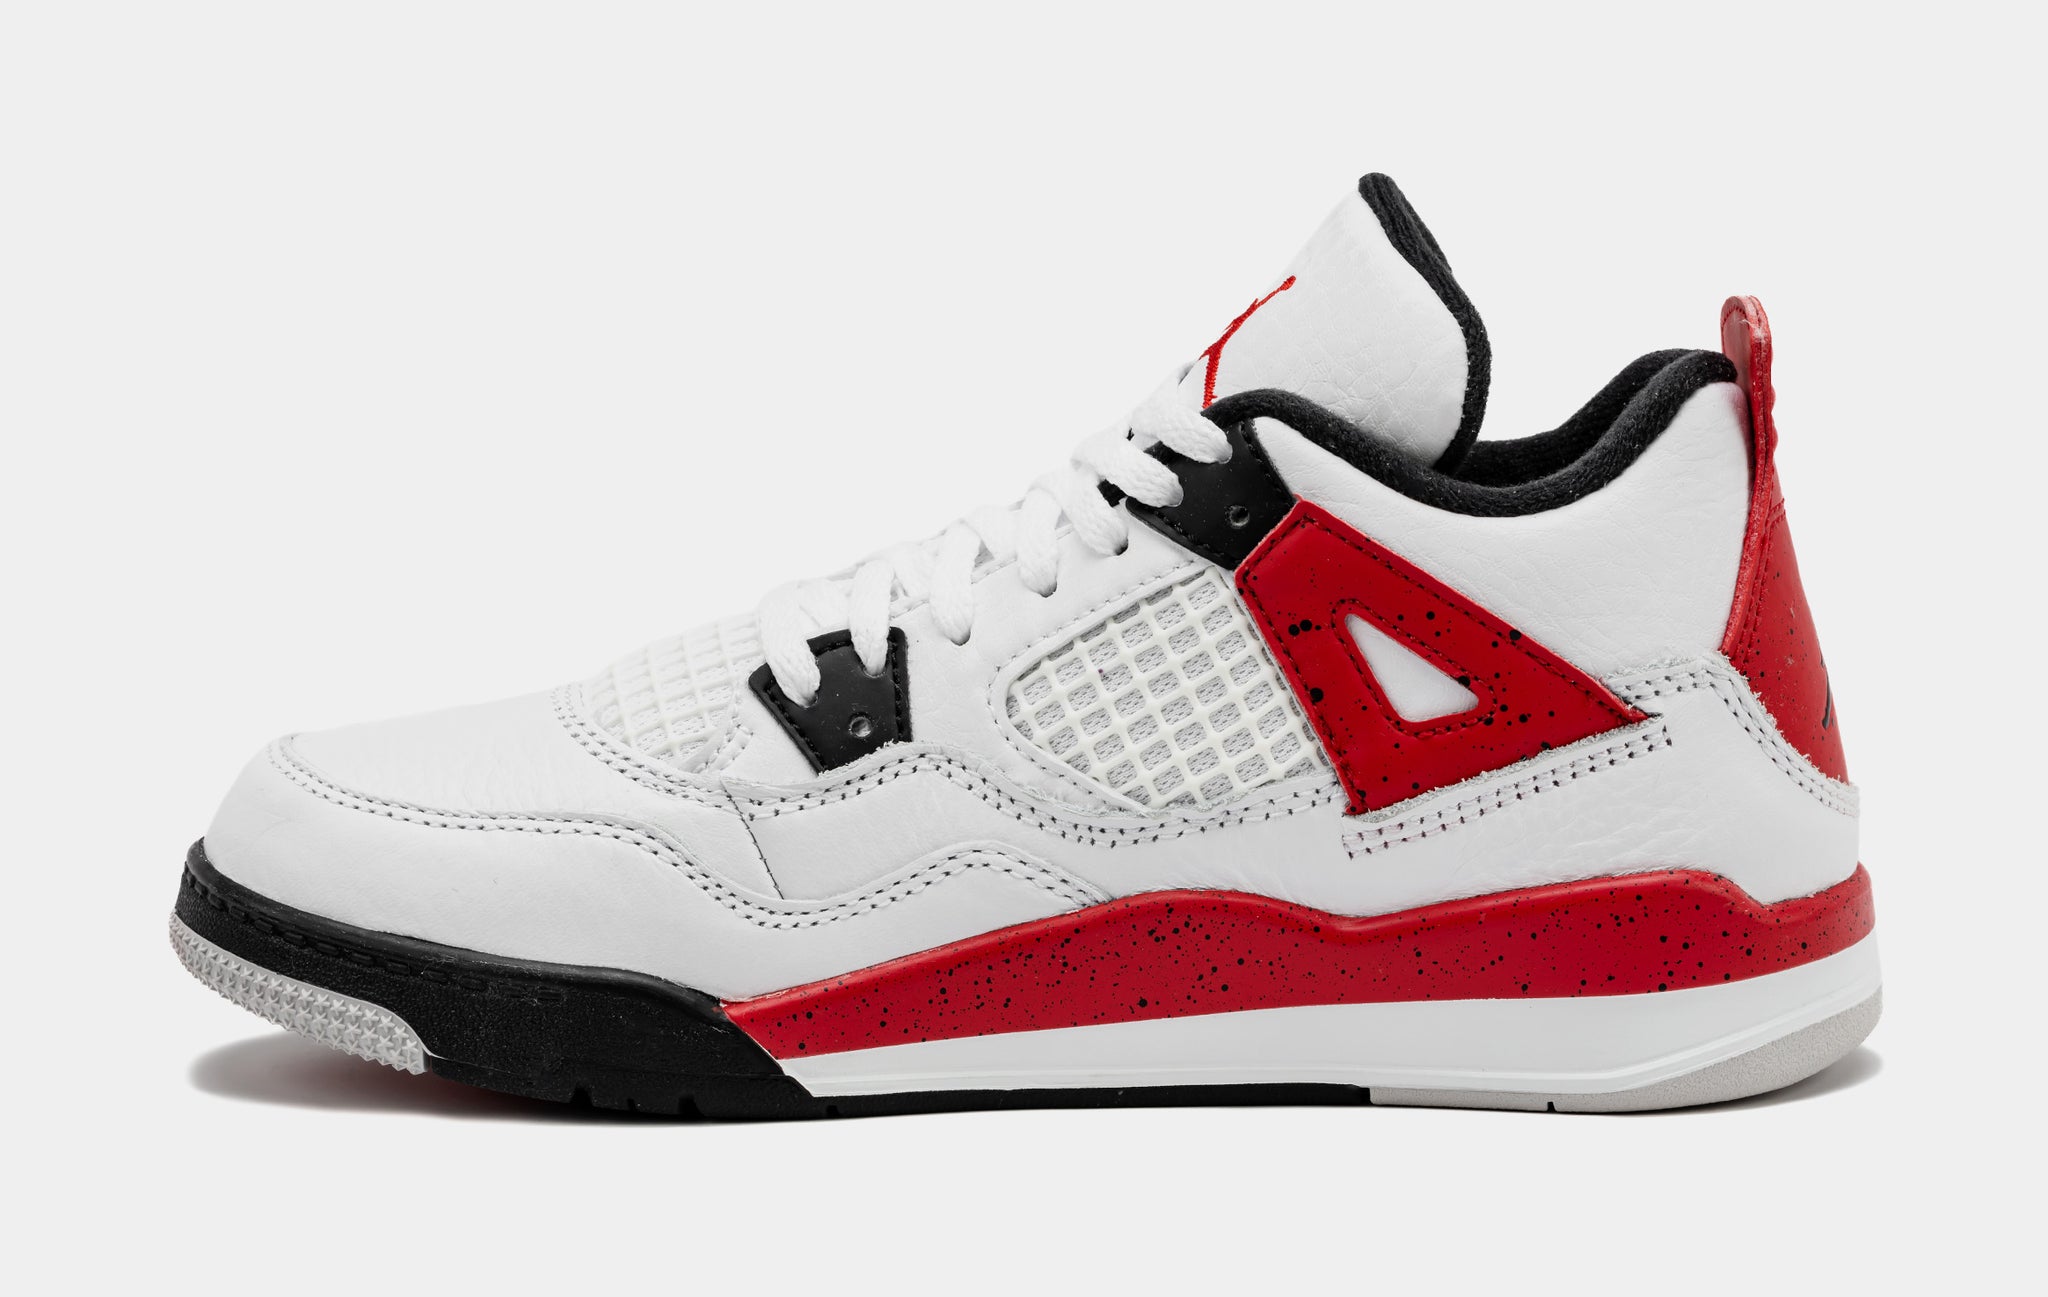 Air Jordan 4 Retro Red Cement Preschool Lifestyle Shoes (White/Red) Free  Shipping